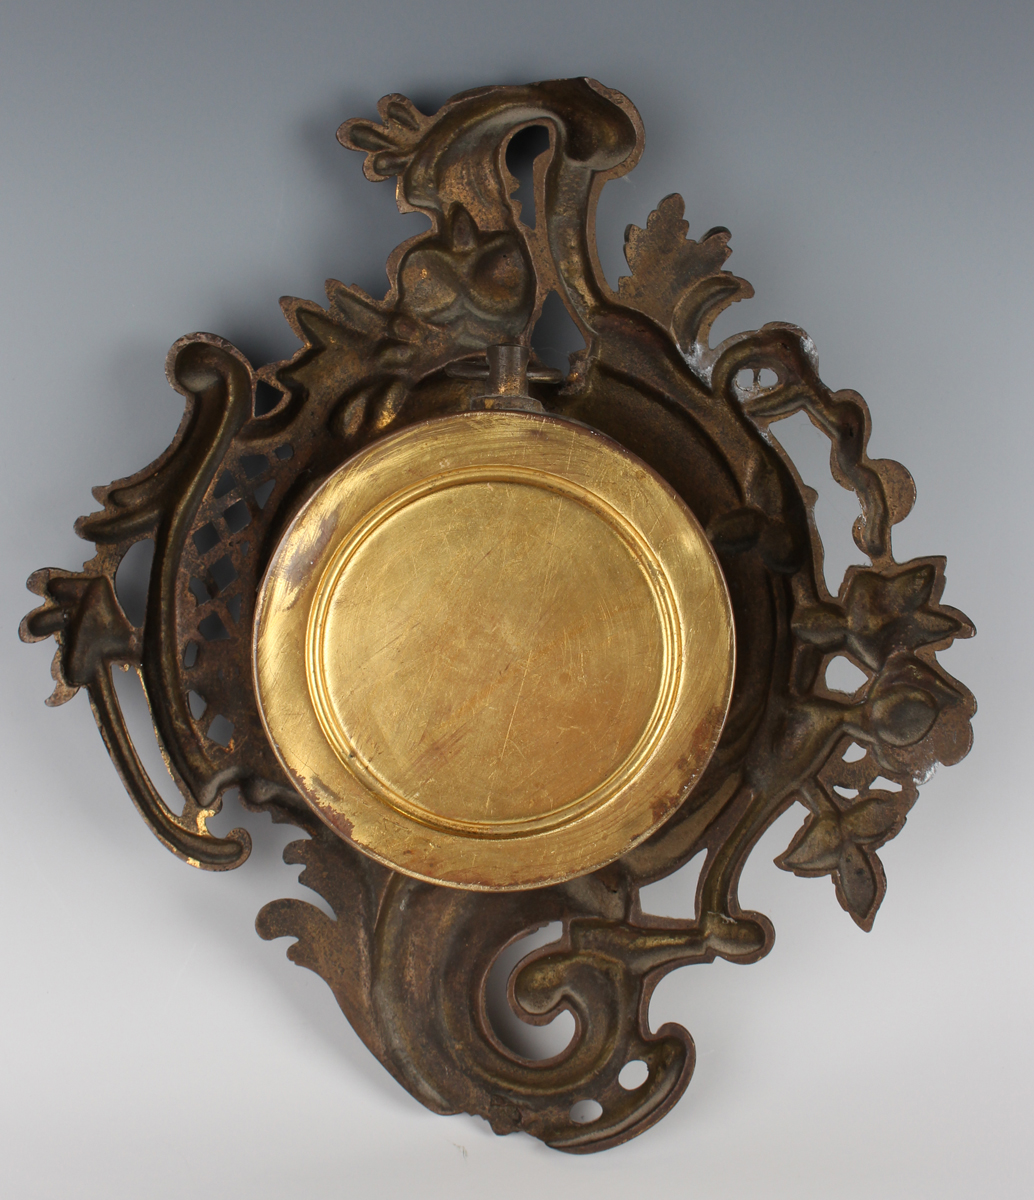 A late 19th century French gilt metal cased wall clock with eight day movement striking on a bell, - Image 2 of 6